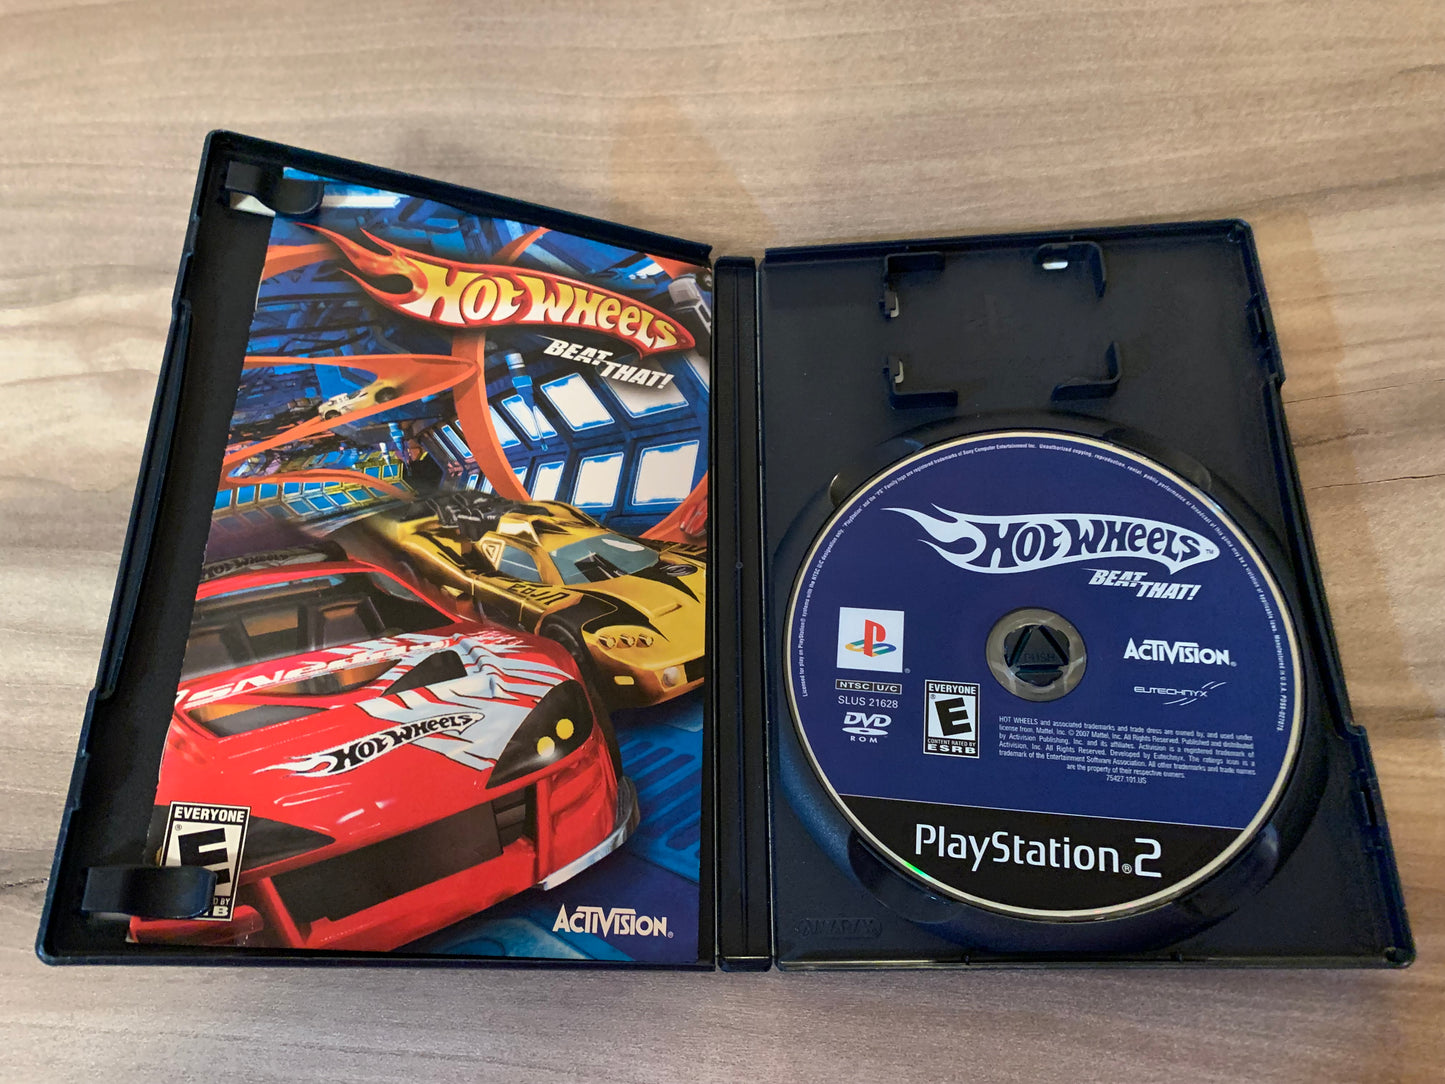 SONY PLAYSTATiON 2 [PS2] | HOT WHEELS BEAT THAT